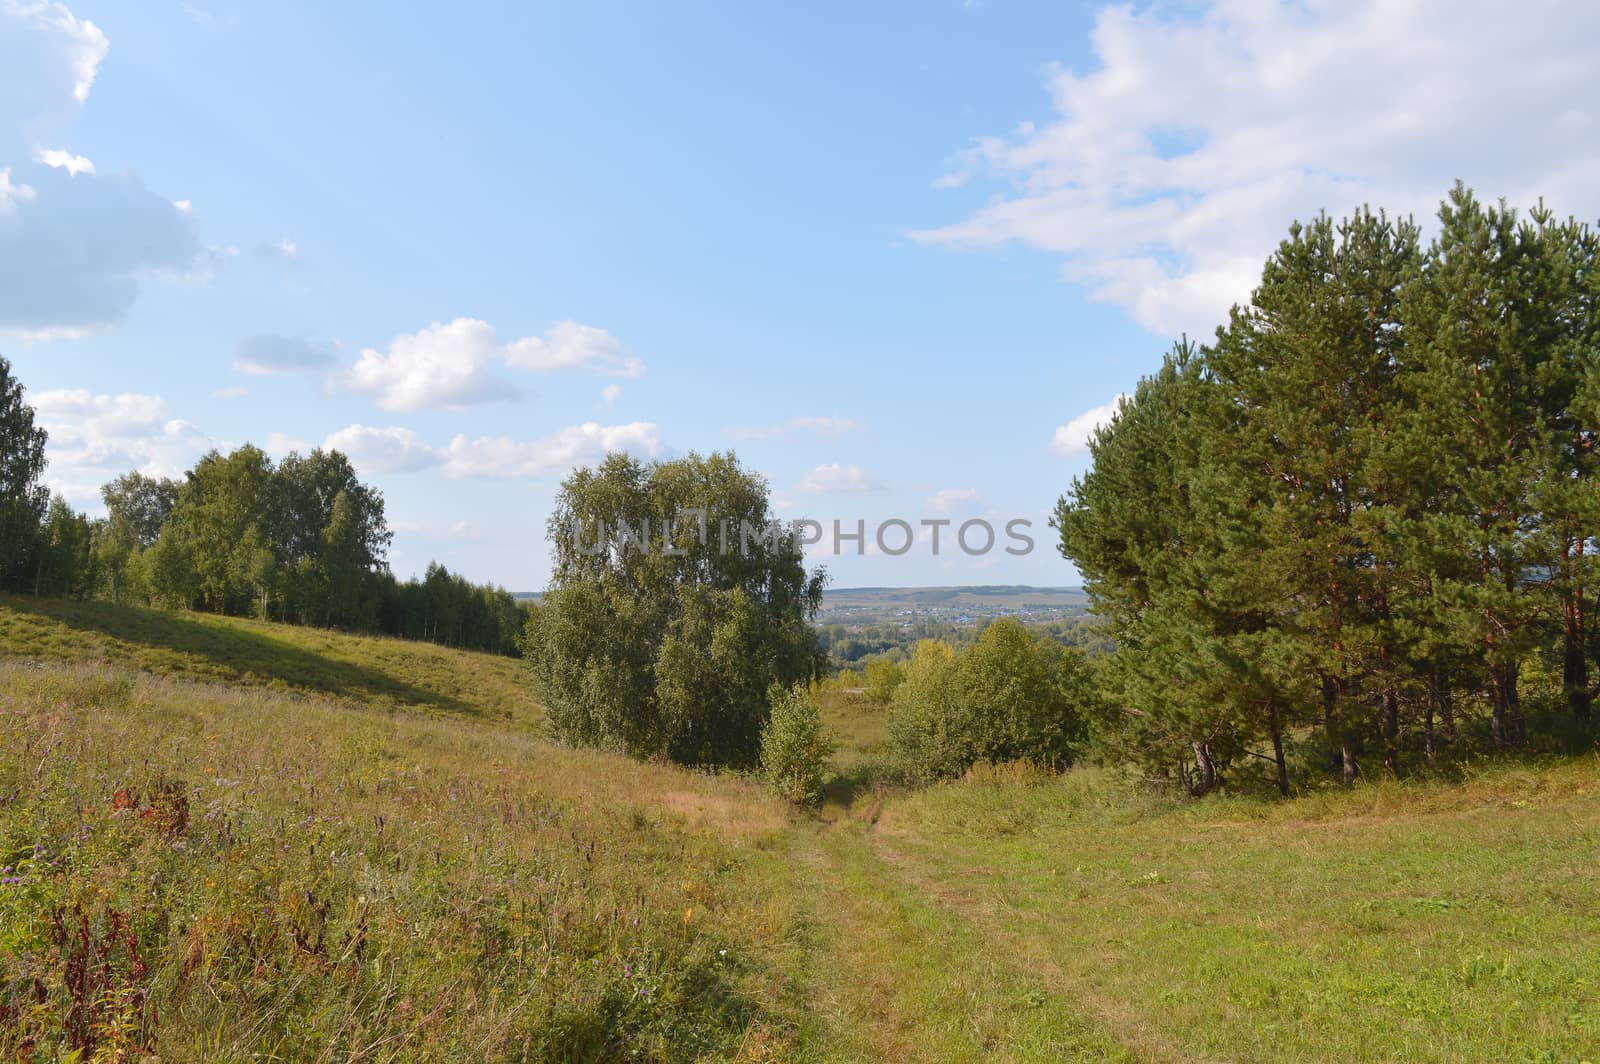 summer landscape with rural road and plants